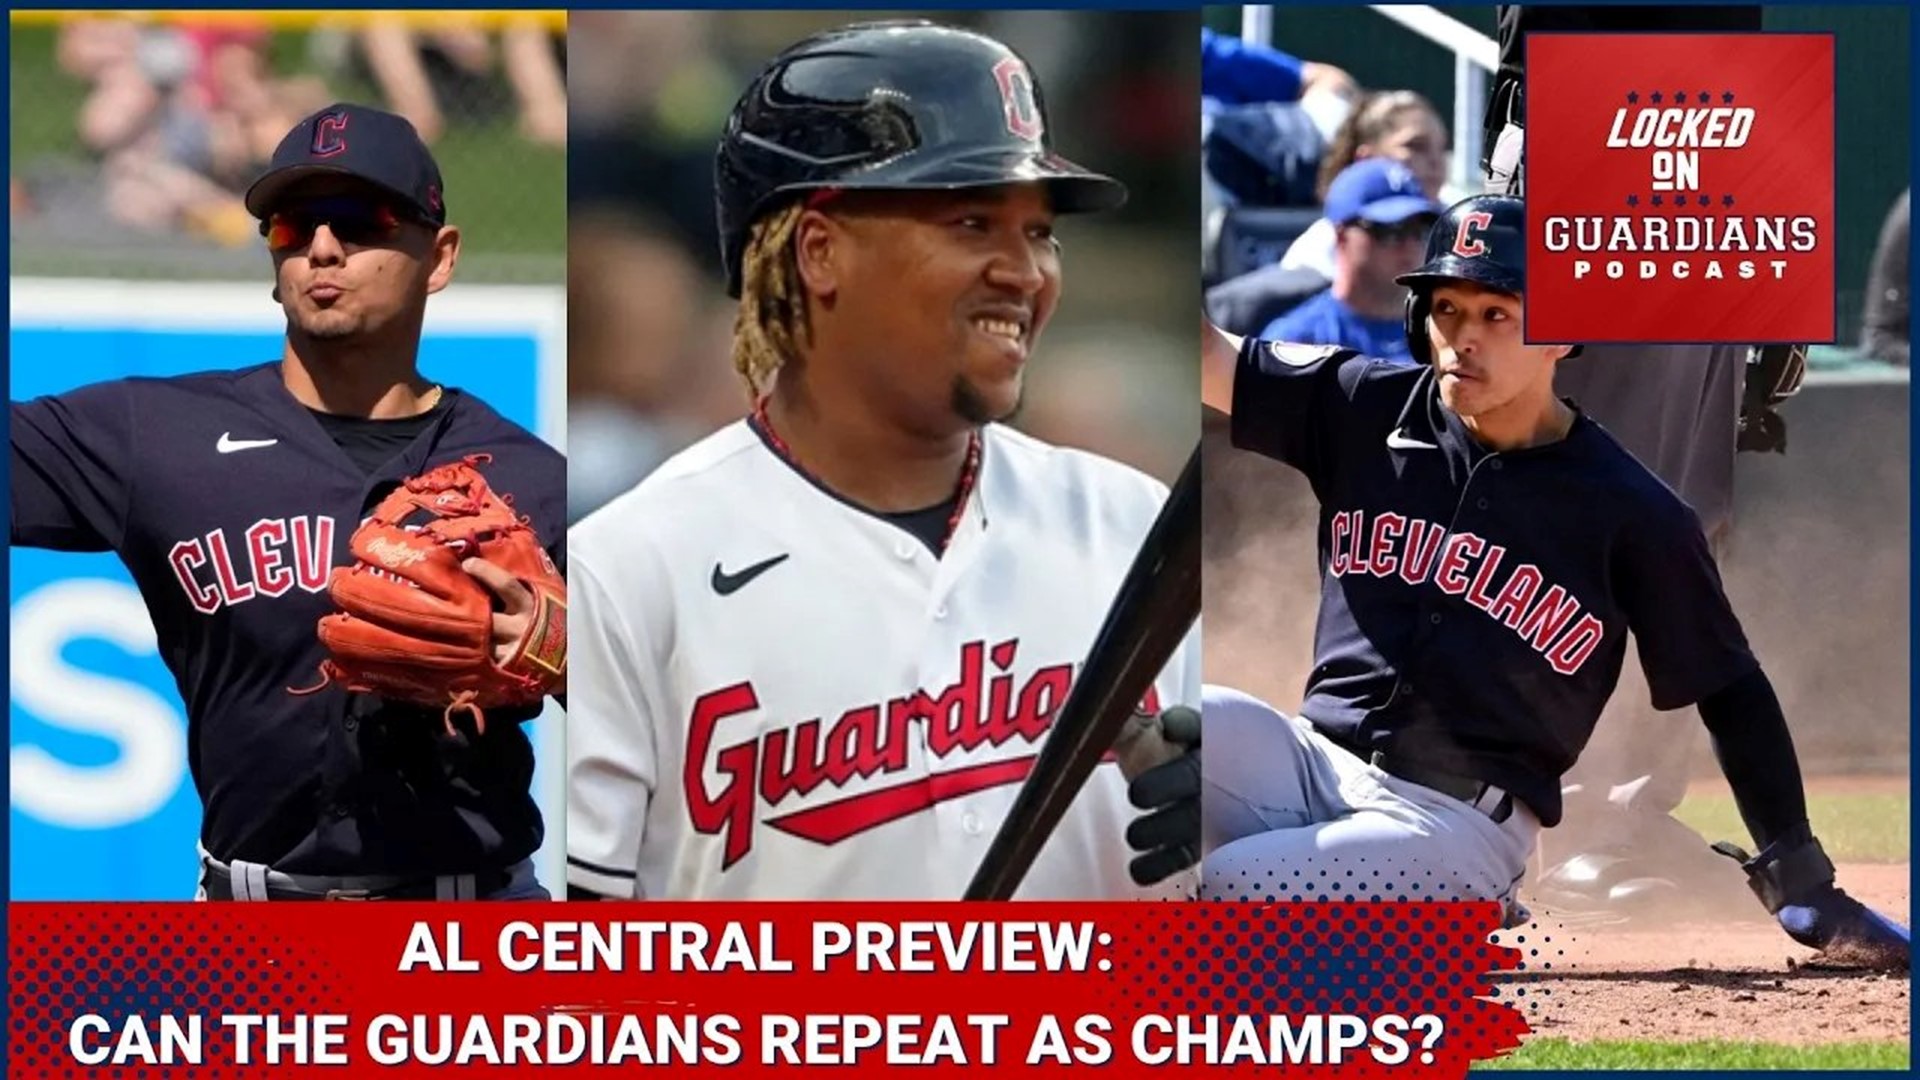 AL Central division preview. Where will the White Sox, Guardians, Royals, Tigers and Twins finish?